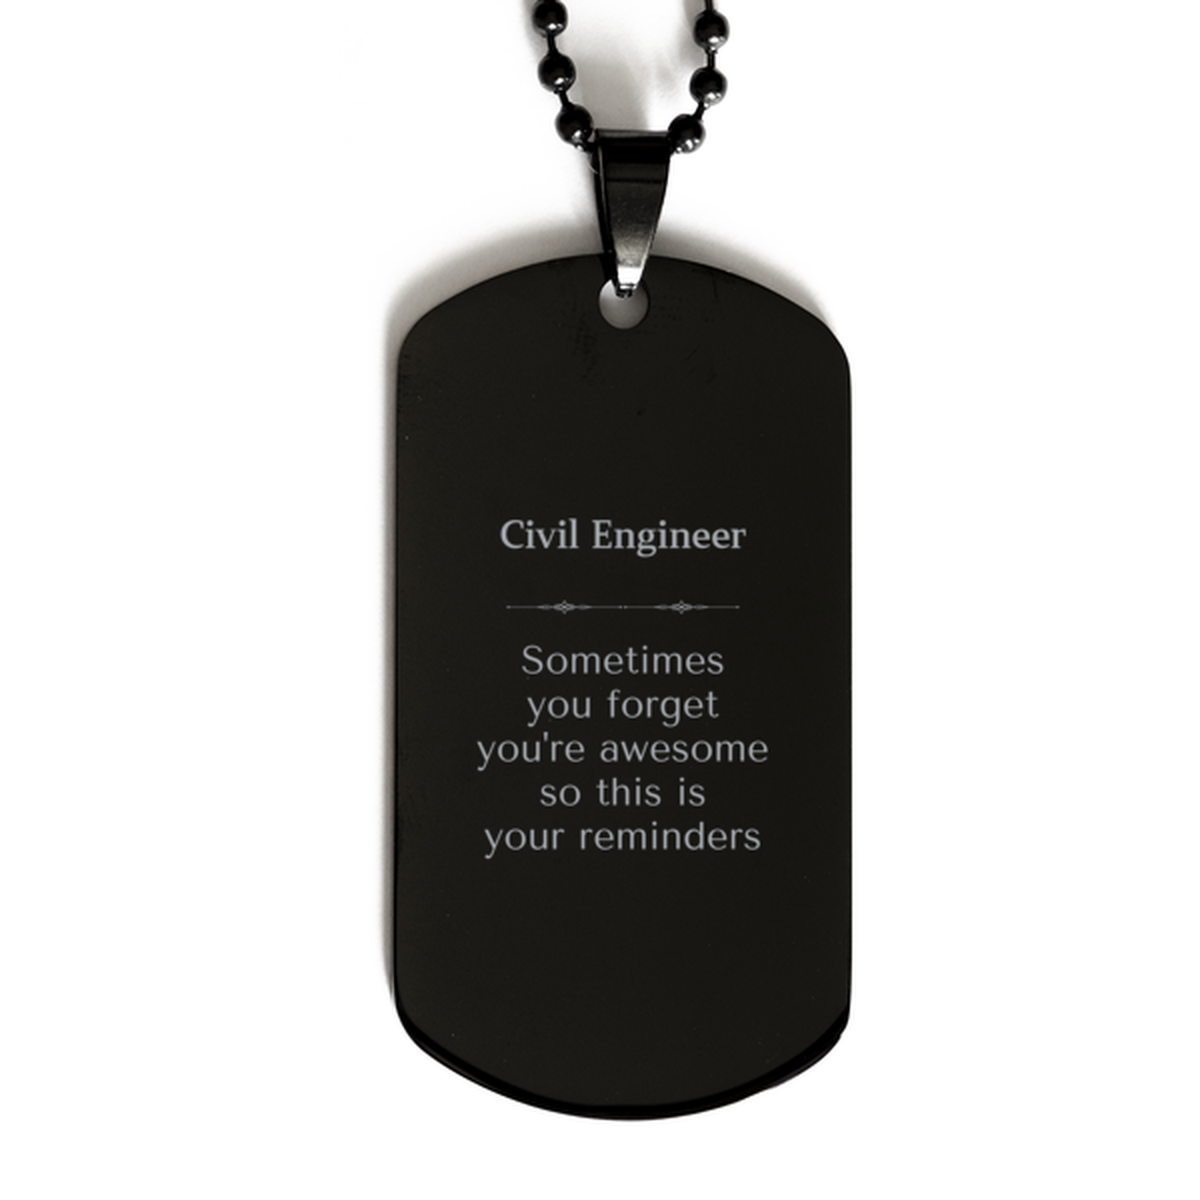 Sentimental Civil Engineer Black Dog Tag, Civil Engineer Sometimes you forget you're awesome so this is your reminders, Graduation Christmas Birthday Gifts for Civil Engineer, Men, Women, Coworkers